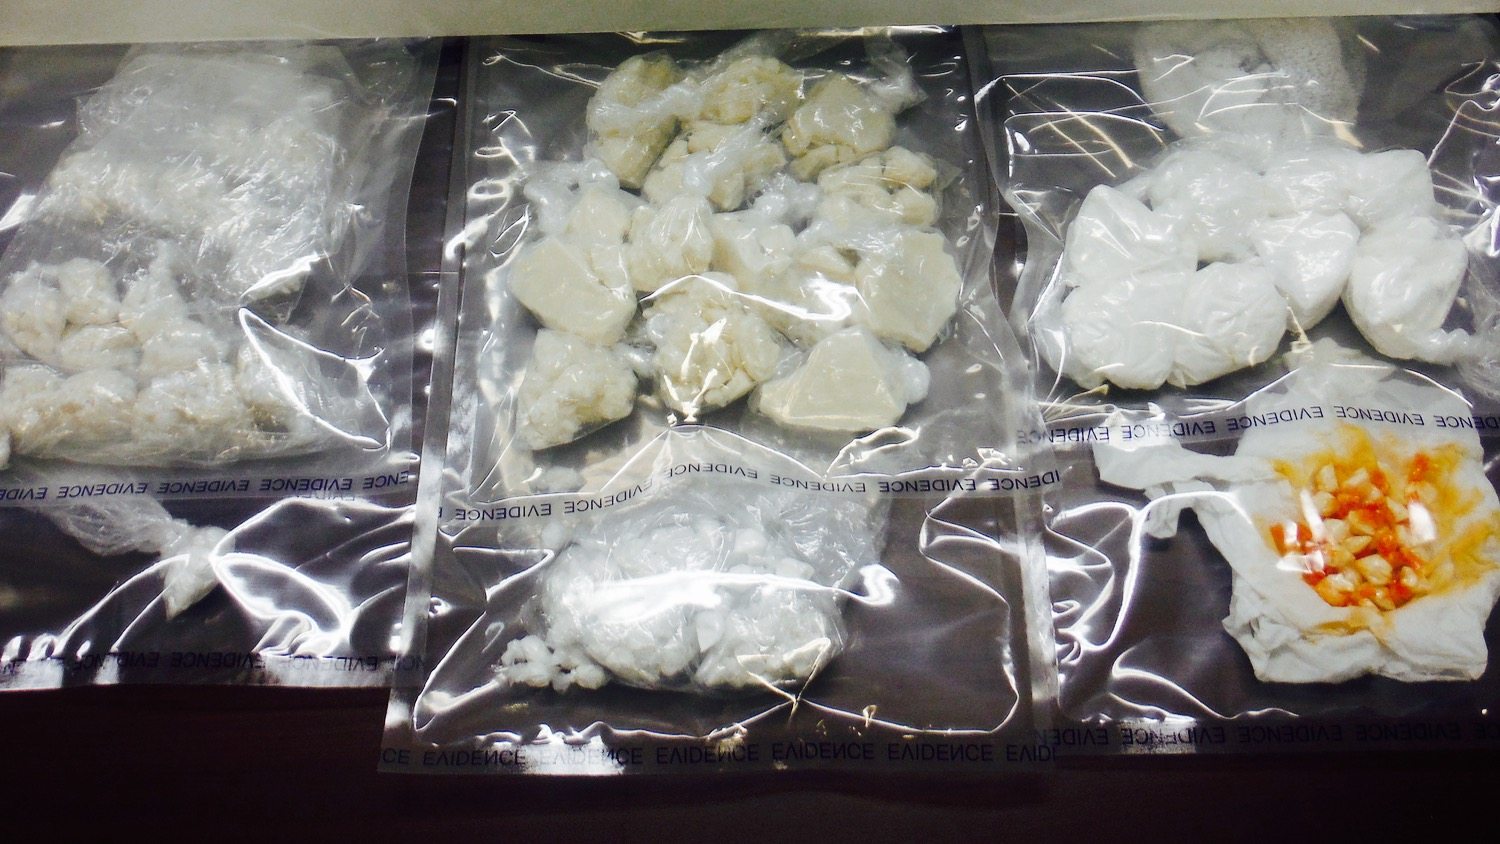 Drugs seized at Fort Gary Apartments